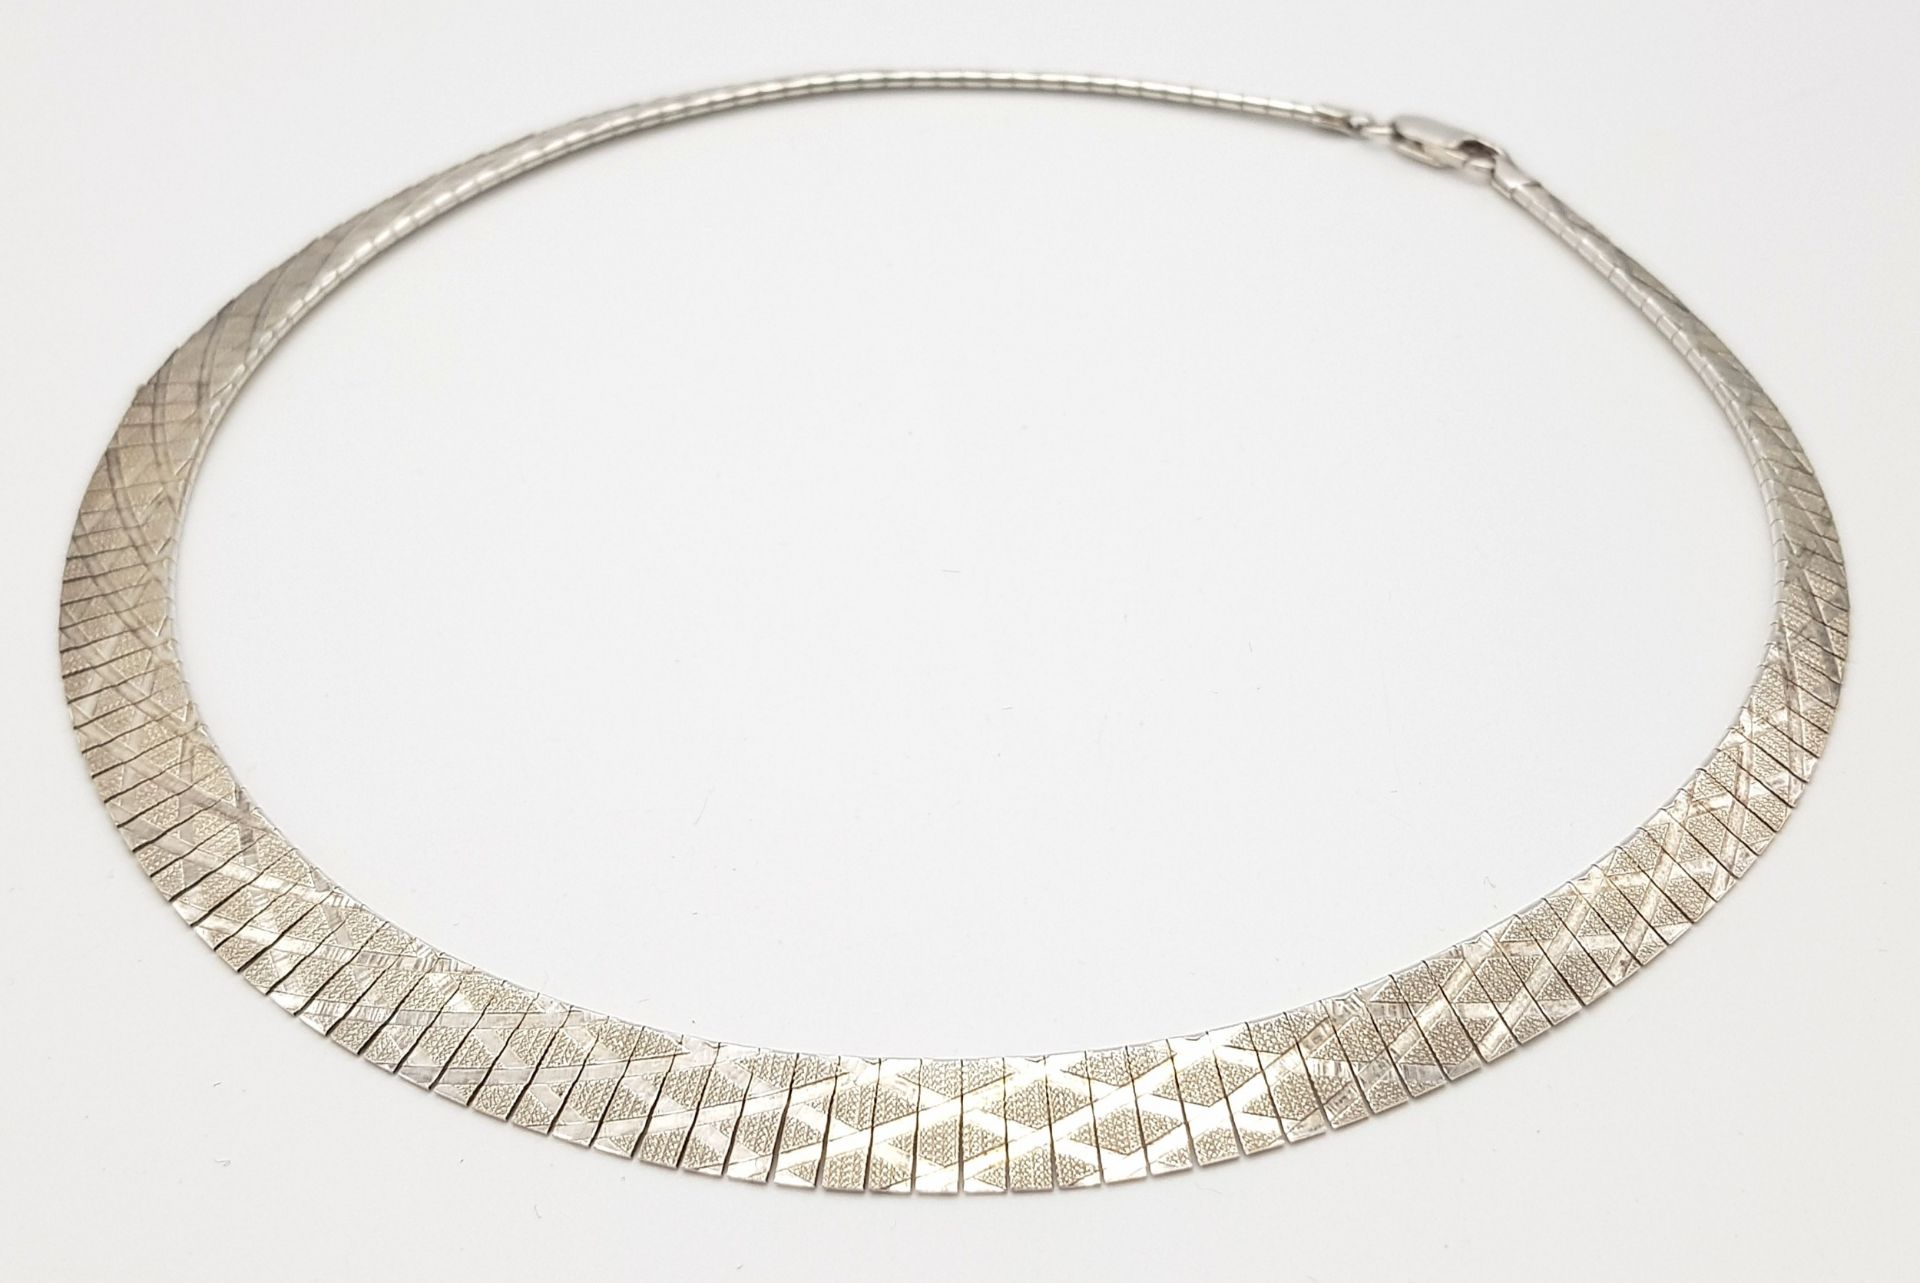 A 925 Sterling Silver, Flat, Etched Pattern Necklace. 44cm. 25g - Image 3 of 6